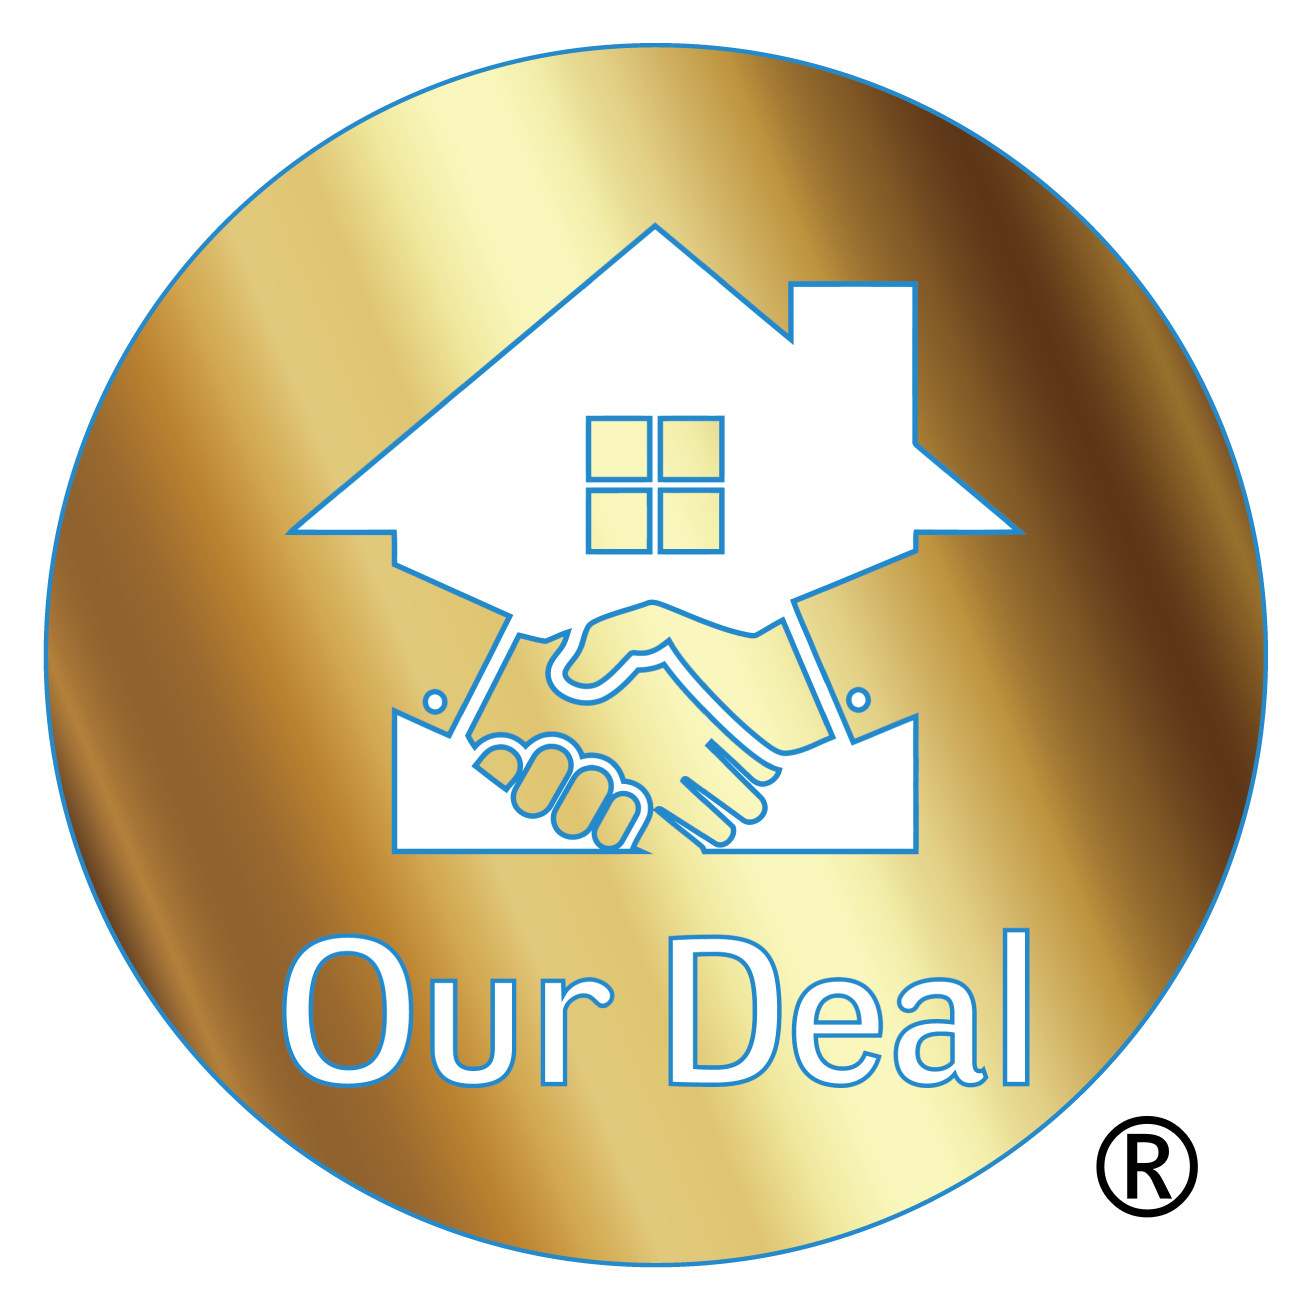 Our Deal logo